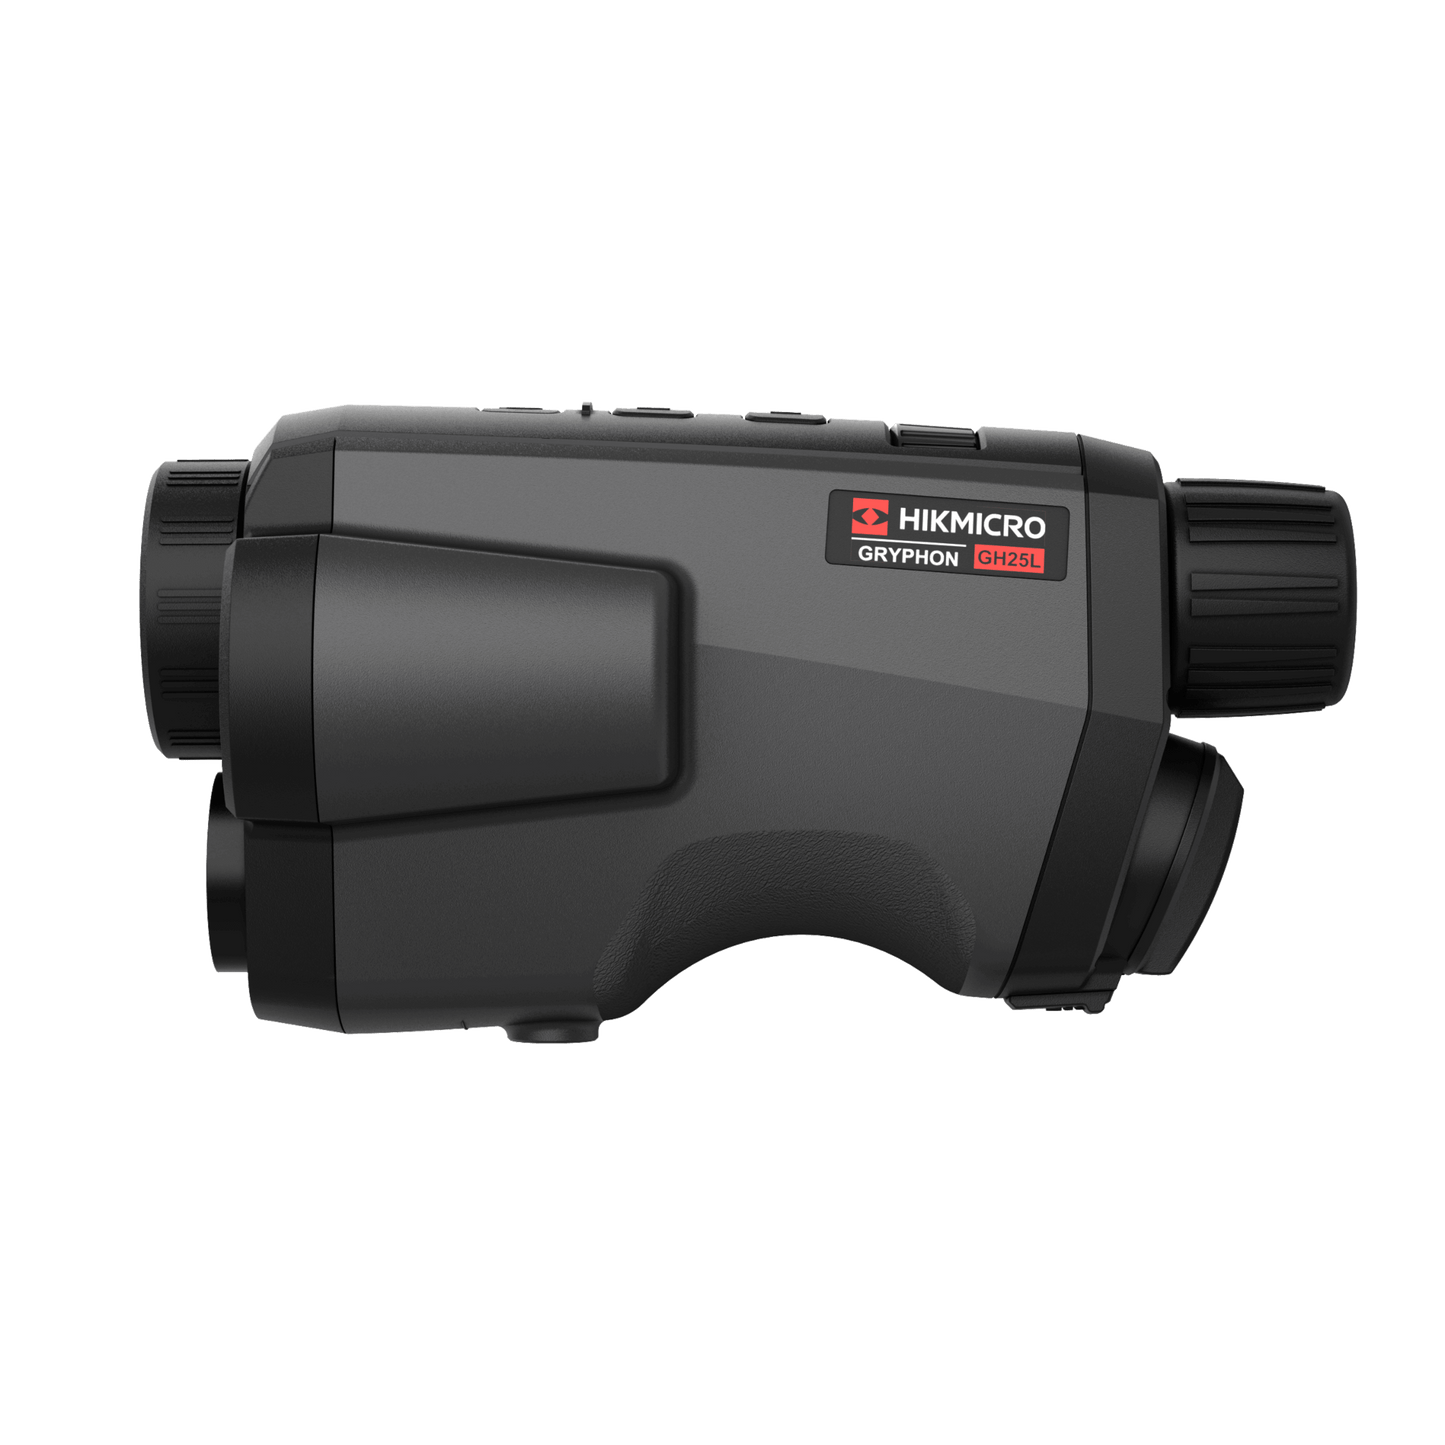 Cape Thermal imaging monocular for sale - HikMicro Gryphon GH25L Handheld thermal monocular left side view